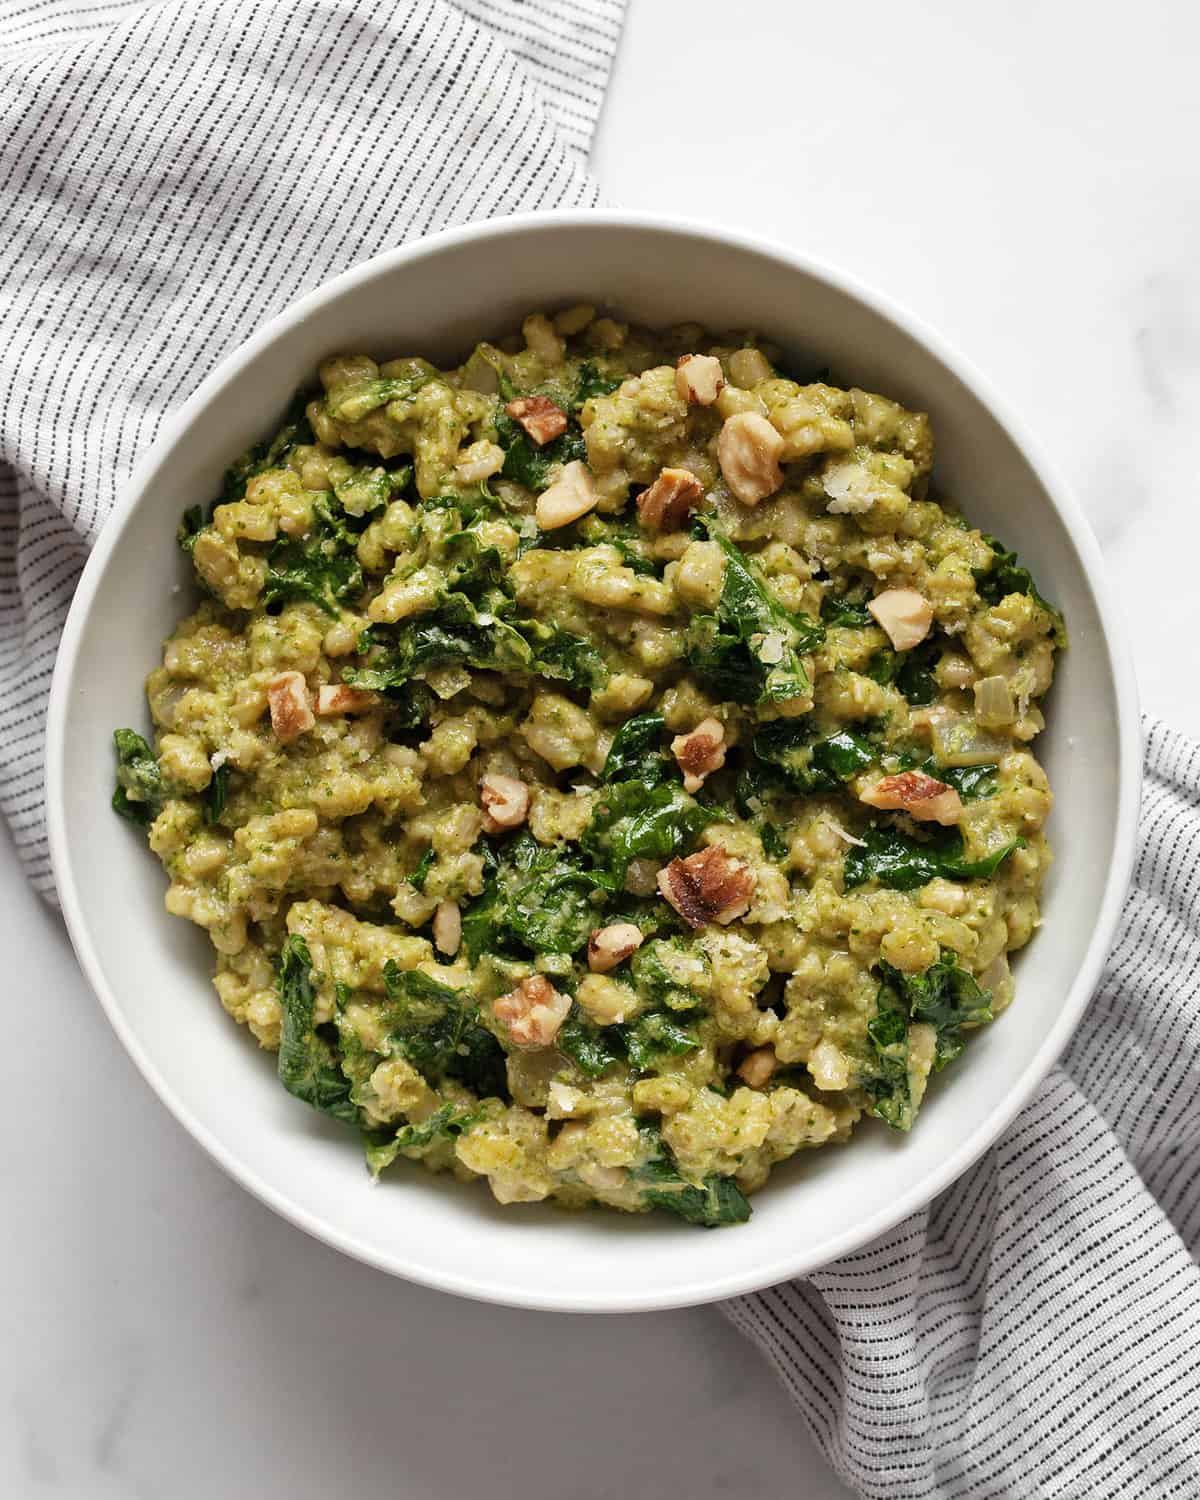 Baked kale risotto in a bowl.